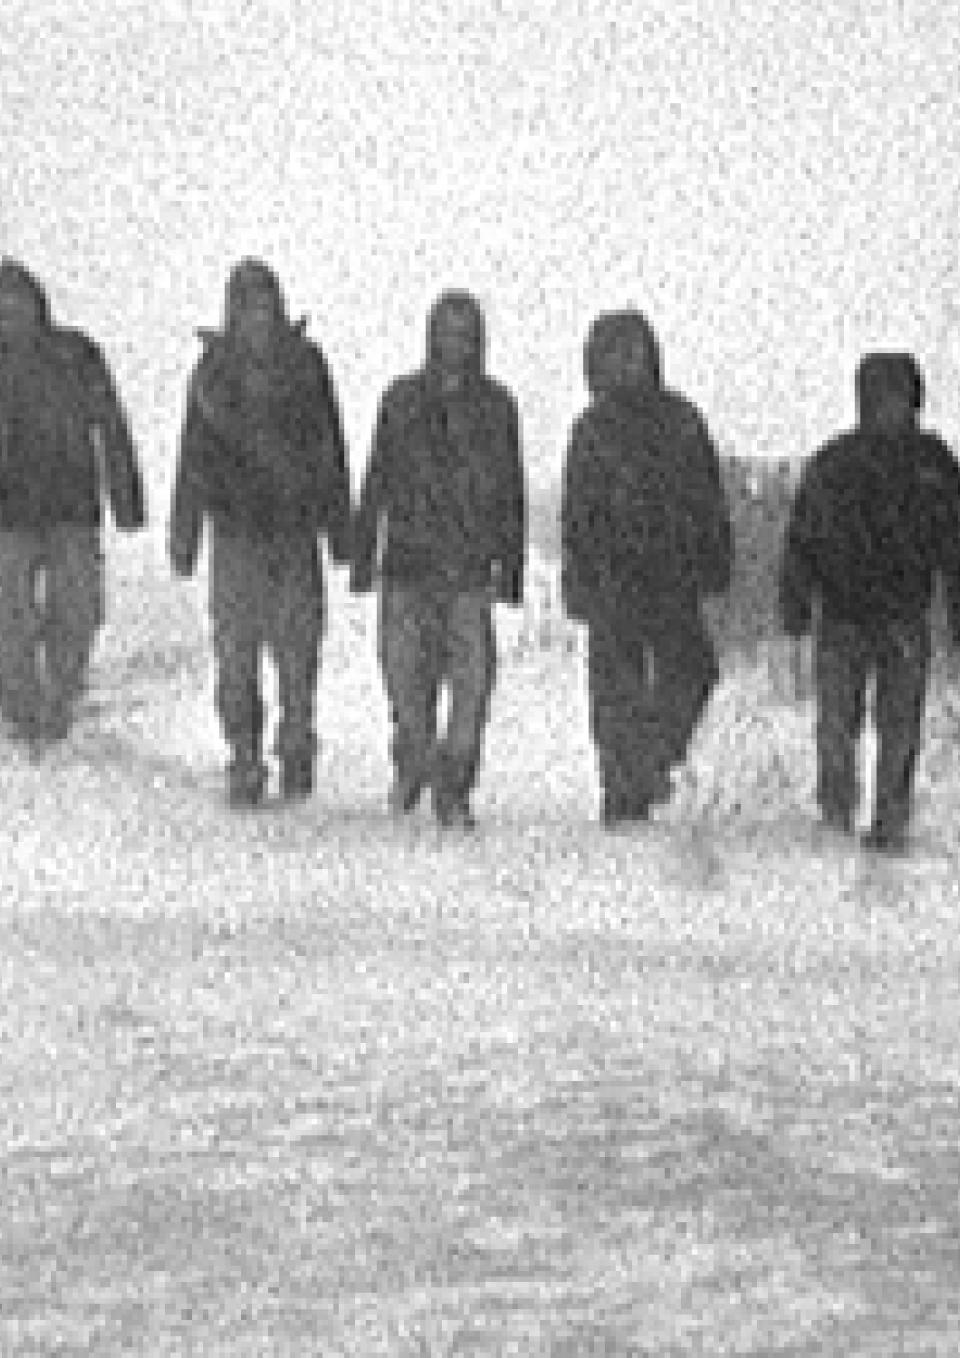 A grainy black and white still from the New Day film Where Soldiers Come From. A row of people shrouded in dark coats and hoods amble down a snowy path. Their surroundings are blurred out with snow but some bushes and trees are visible on the sides of the road.